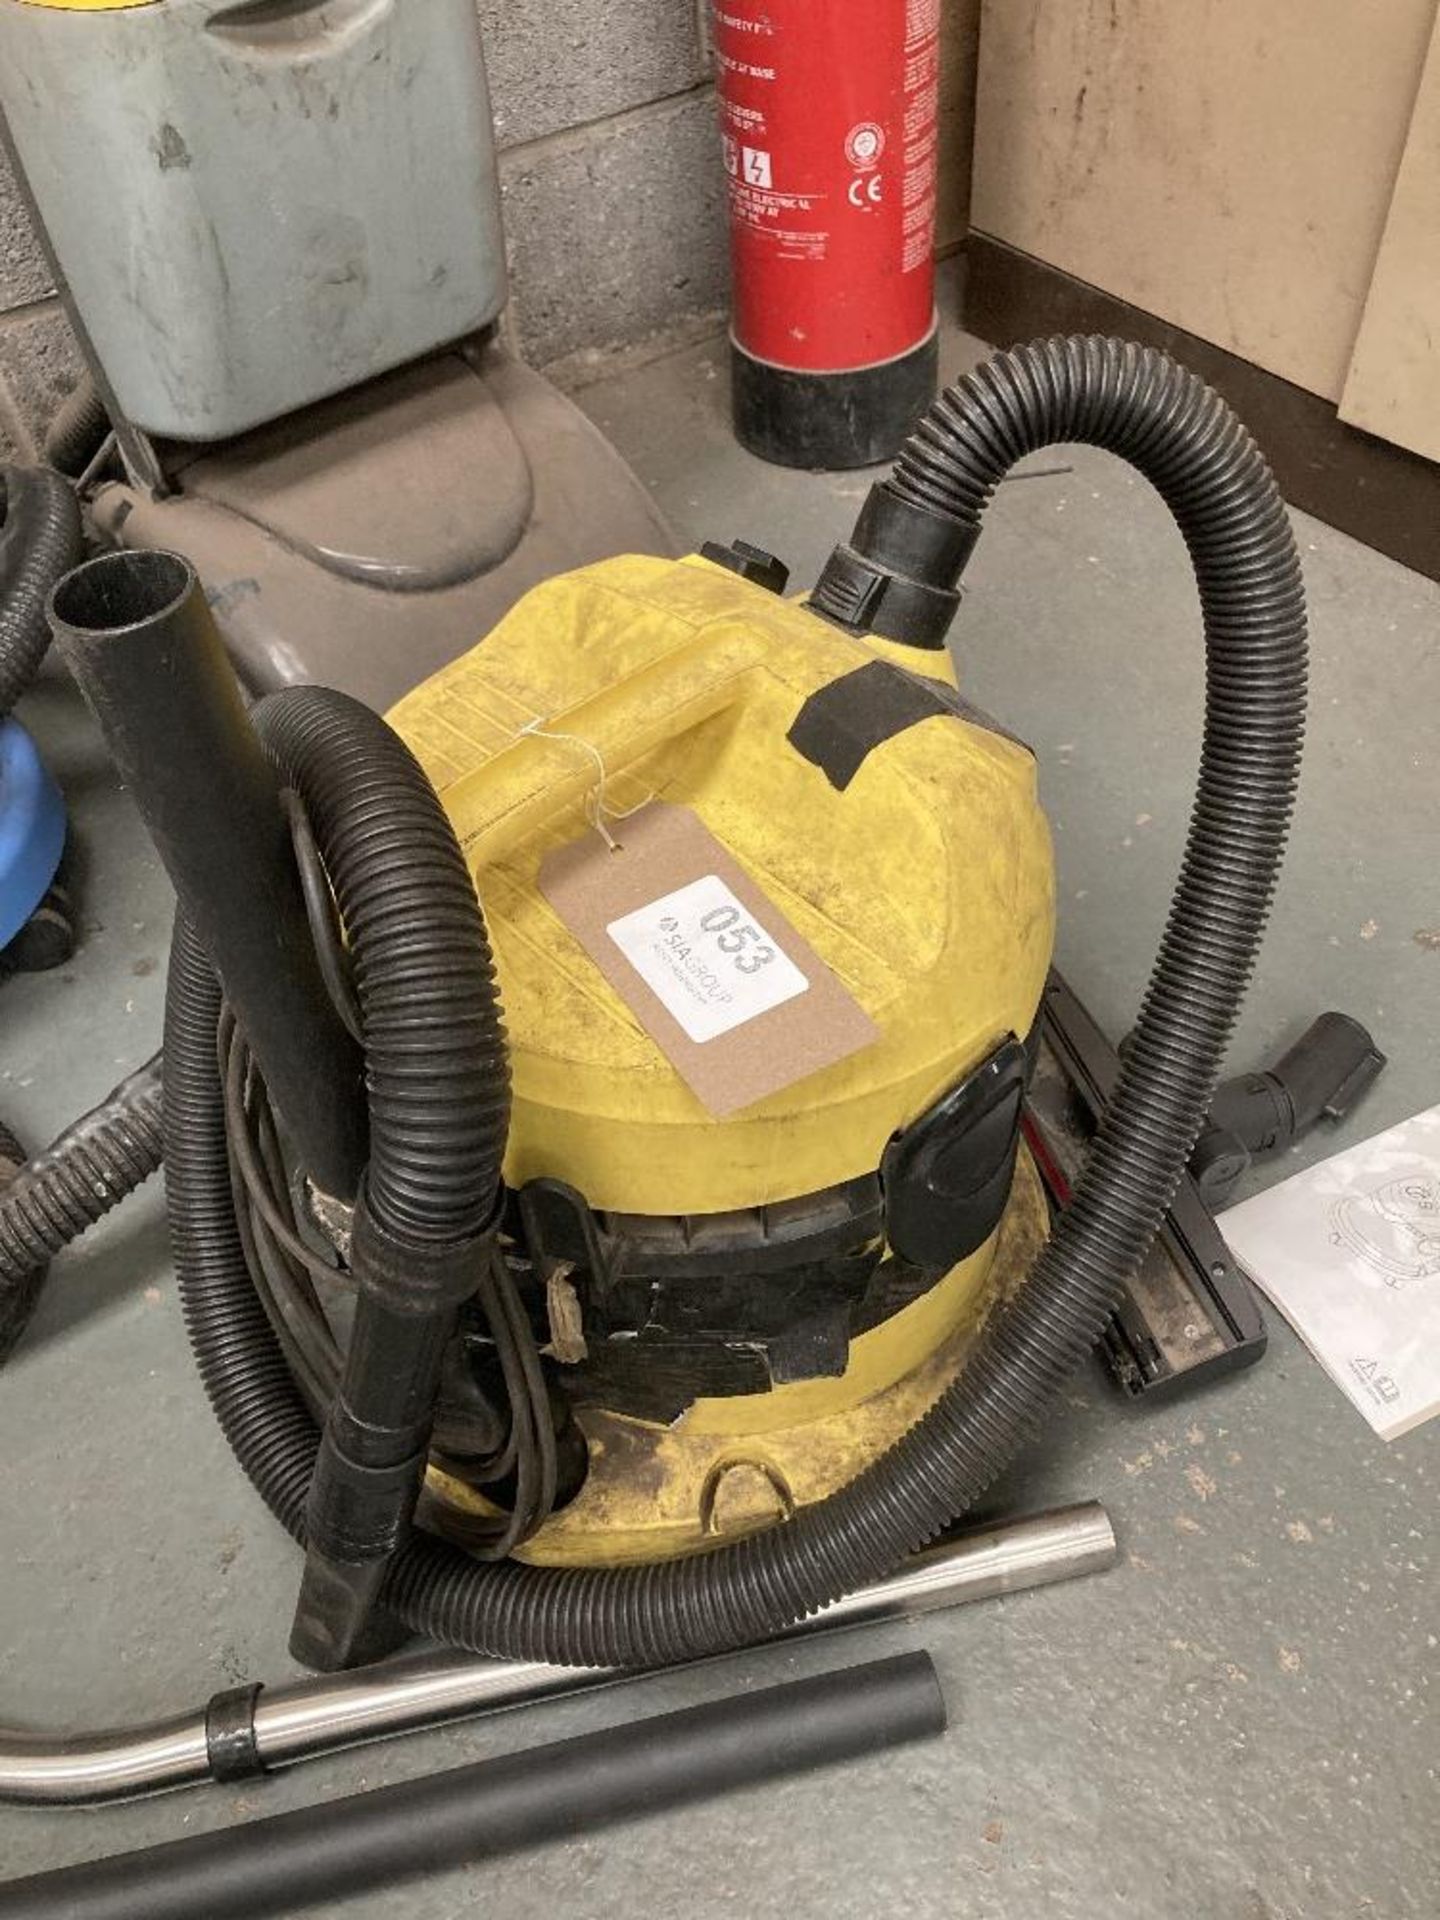 Karcher WD2 wet and dry vac